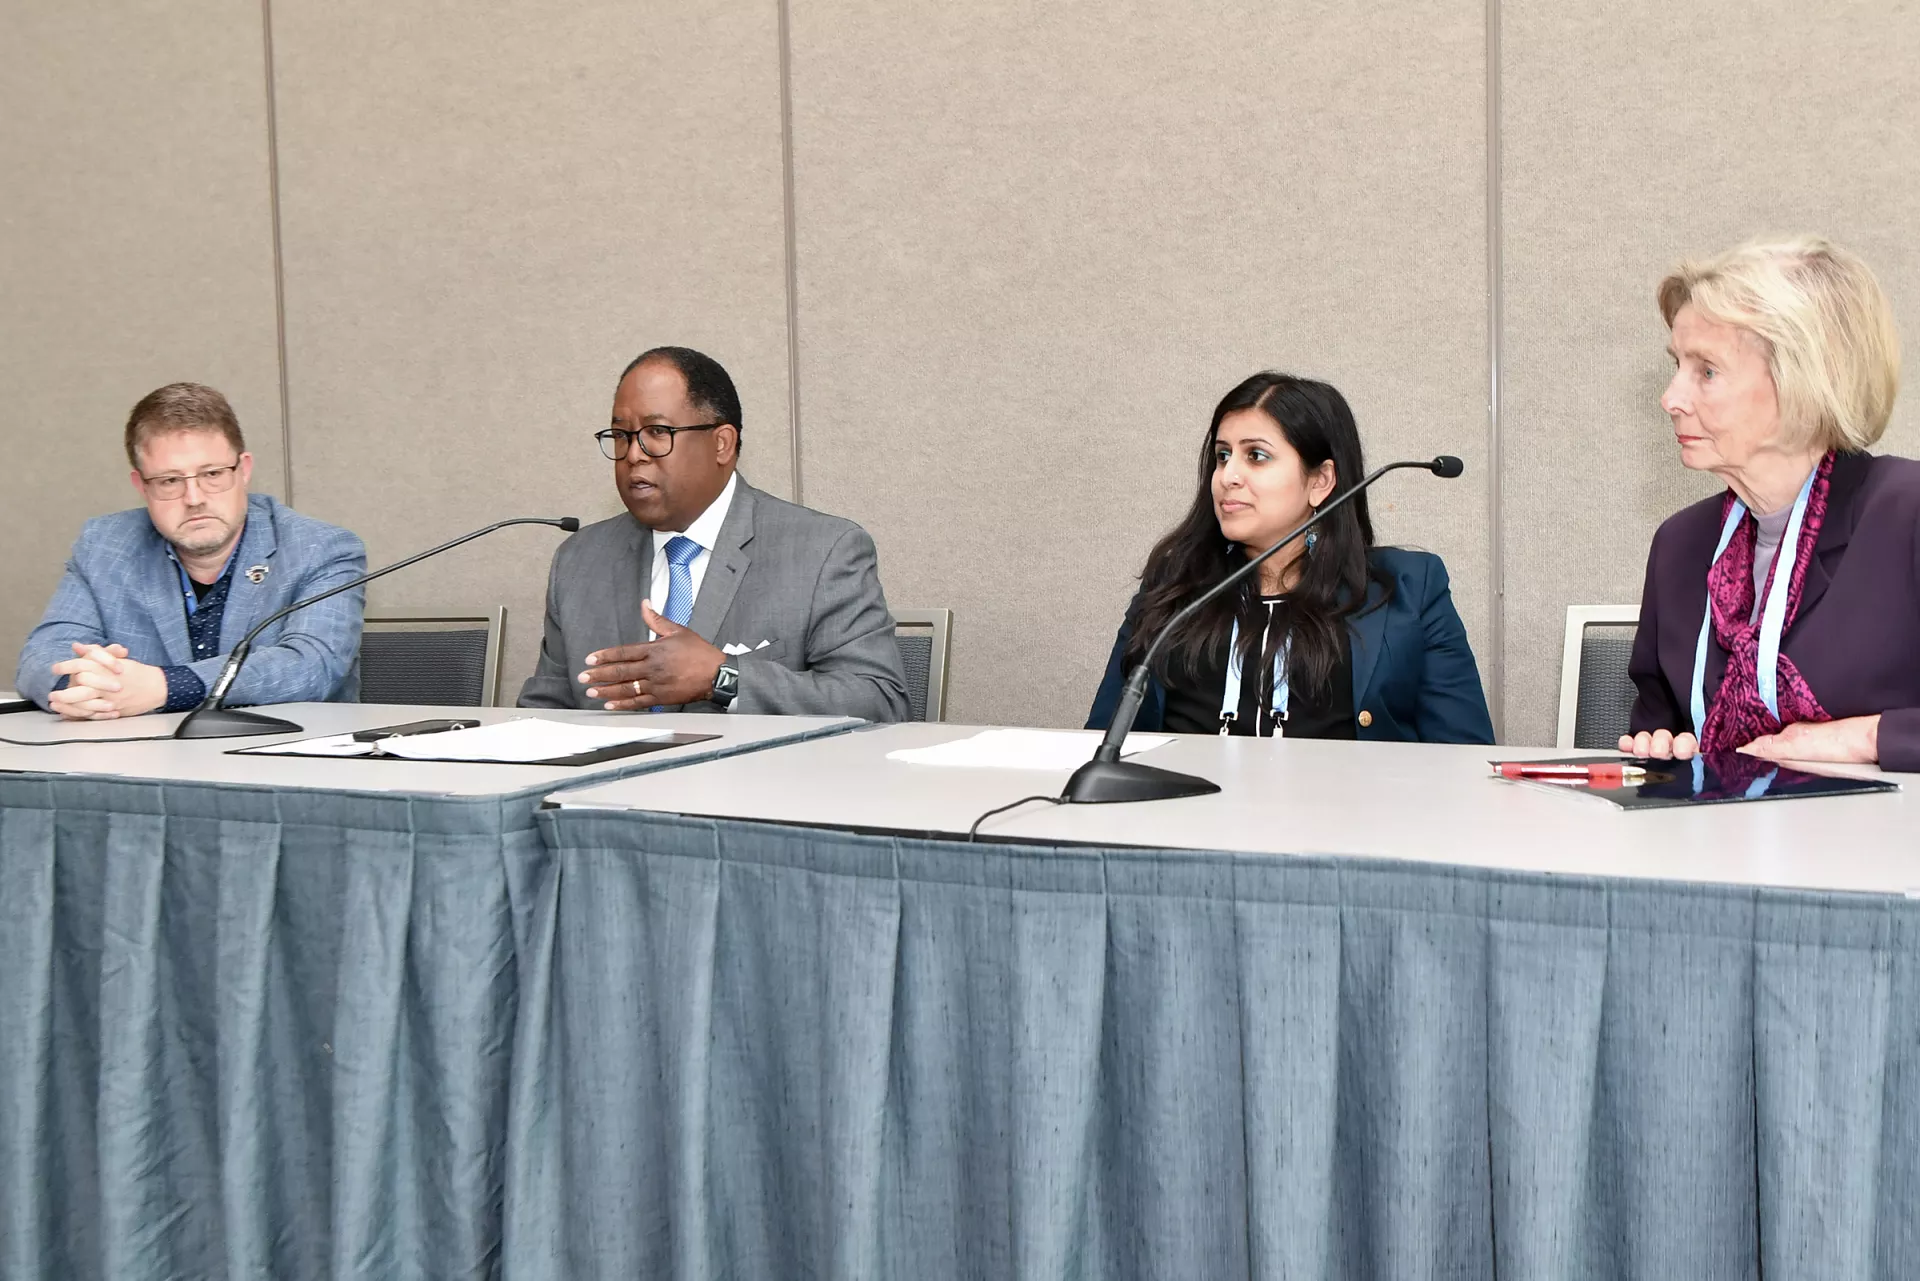 American Academy of Religion Annual Conference San Diego, CA (November 2019) Panel on Housing, Health and Equity: Government as a Site for Intersec-tional Justice. Left to right: J. Shawn Landres, PhD; Hon. Mark Ridley-Thomas, PhD; Hon. Sadat Jaffer, PhD; and Hon. Lois Capps, RN, MA (Ret.)